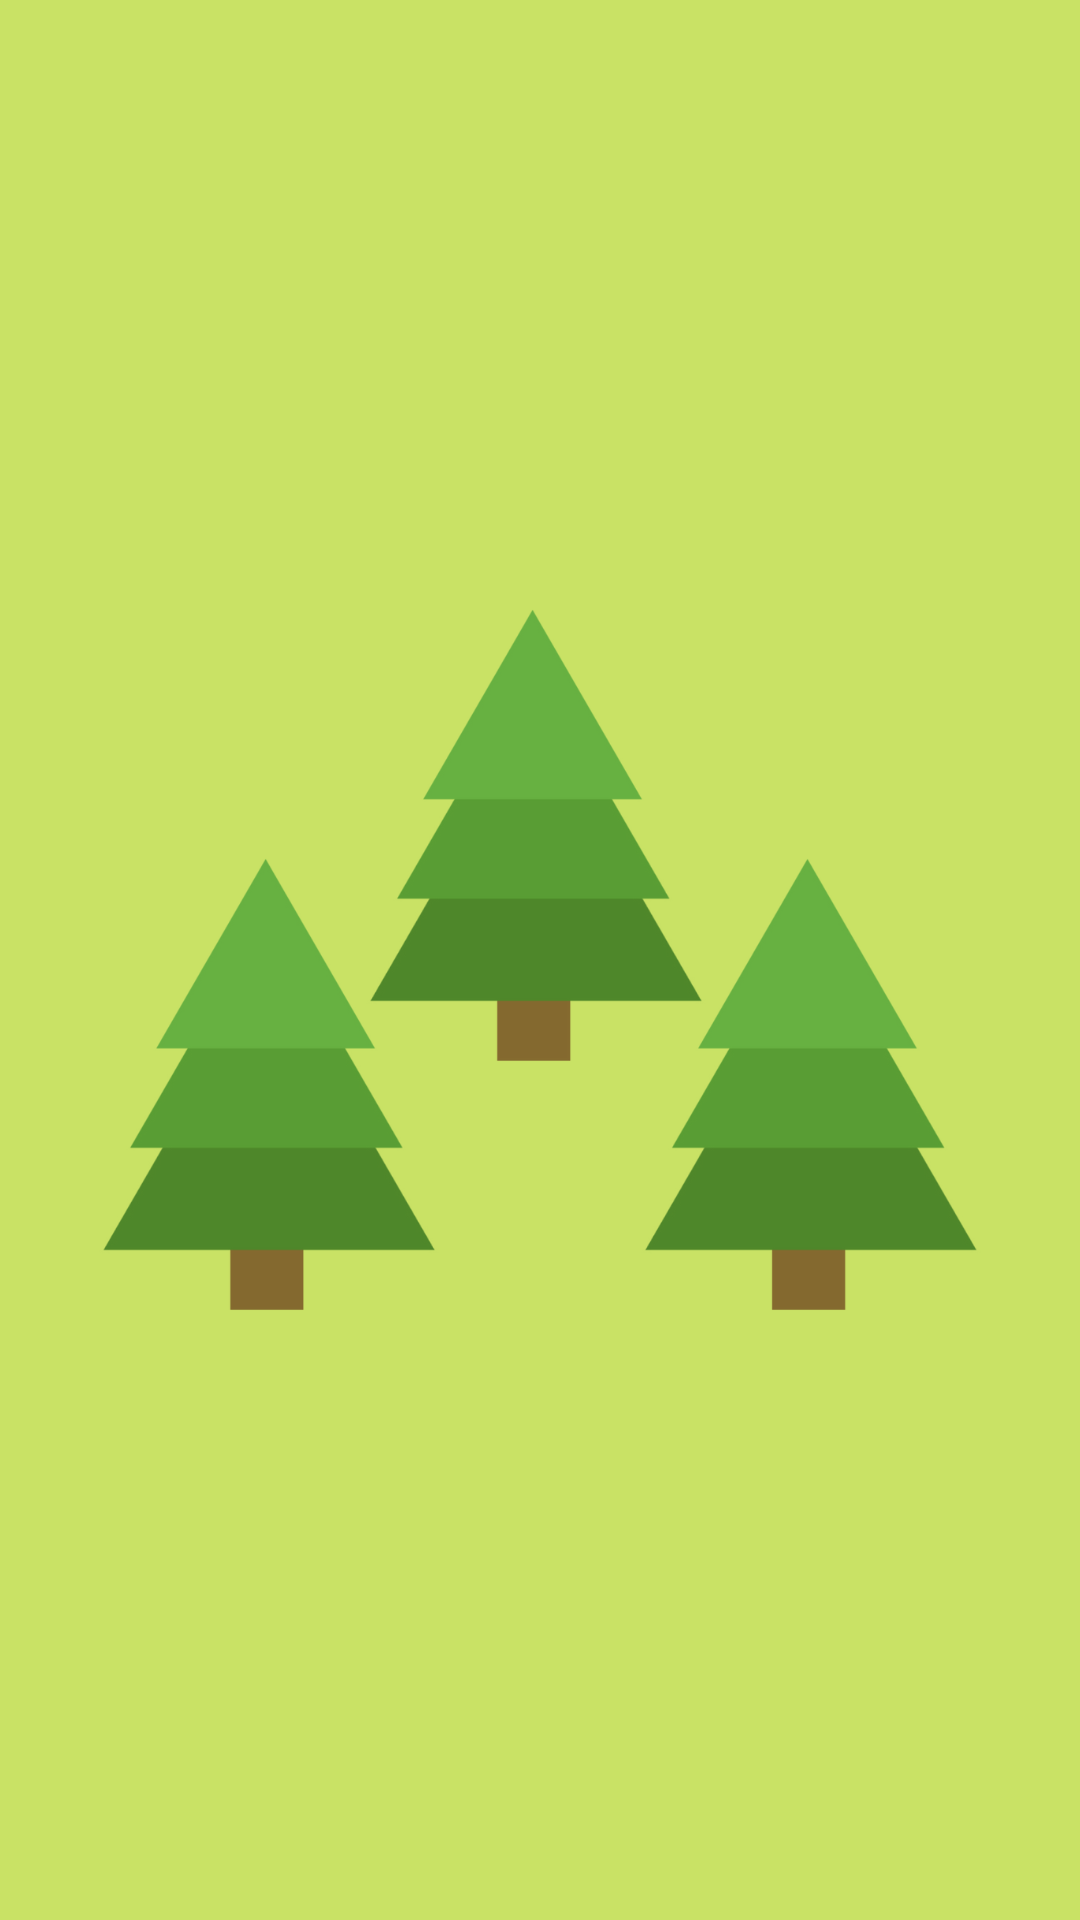 cell phone wallpaper with pine trees